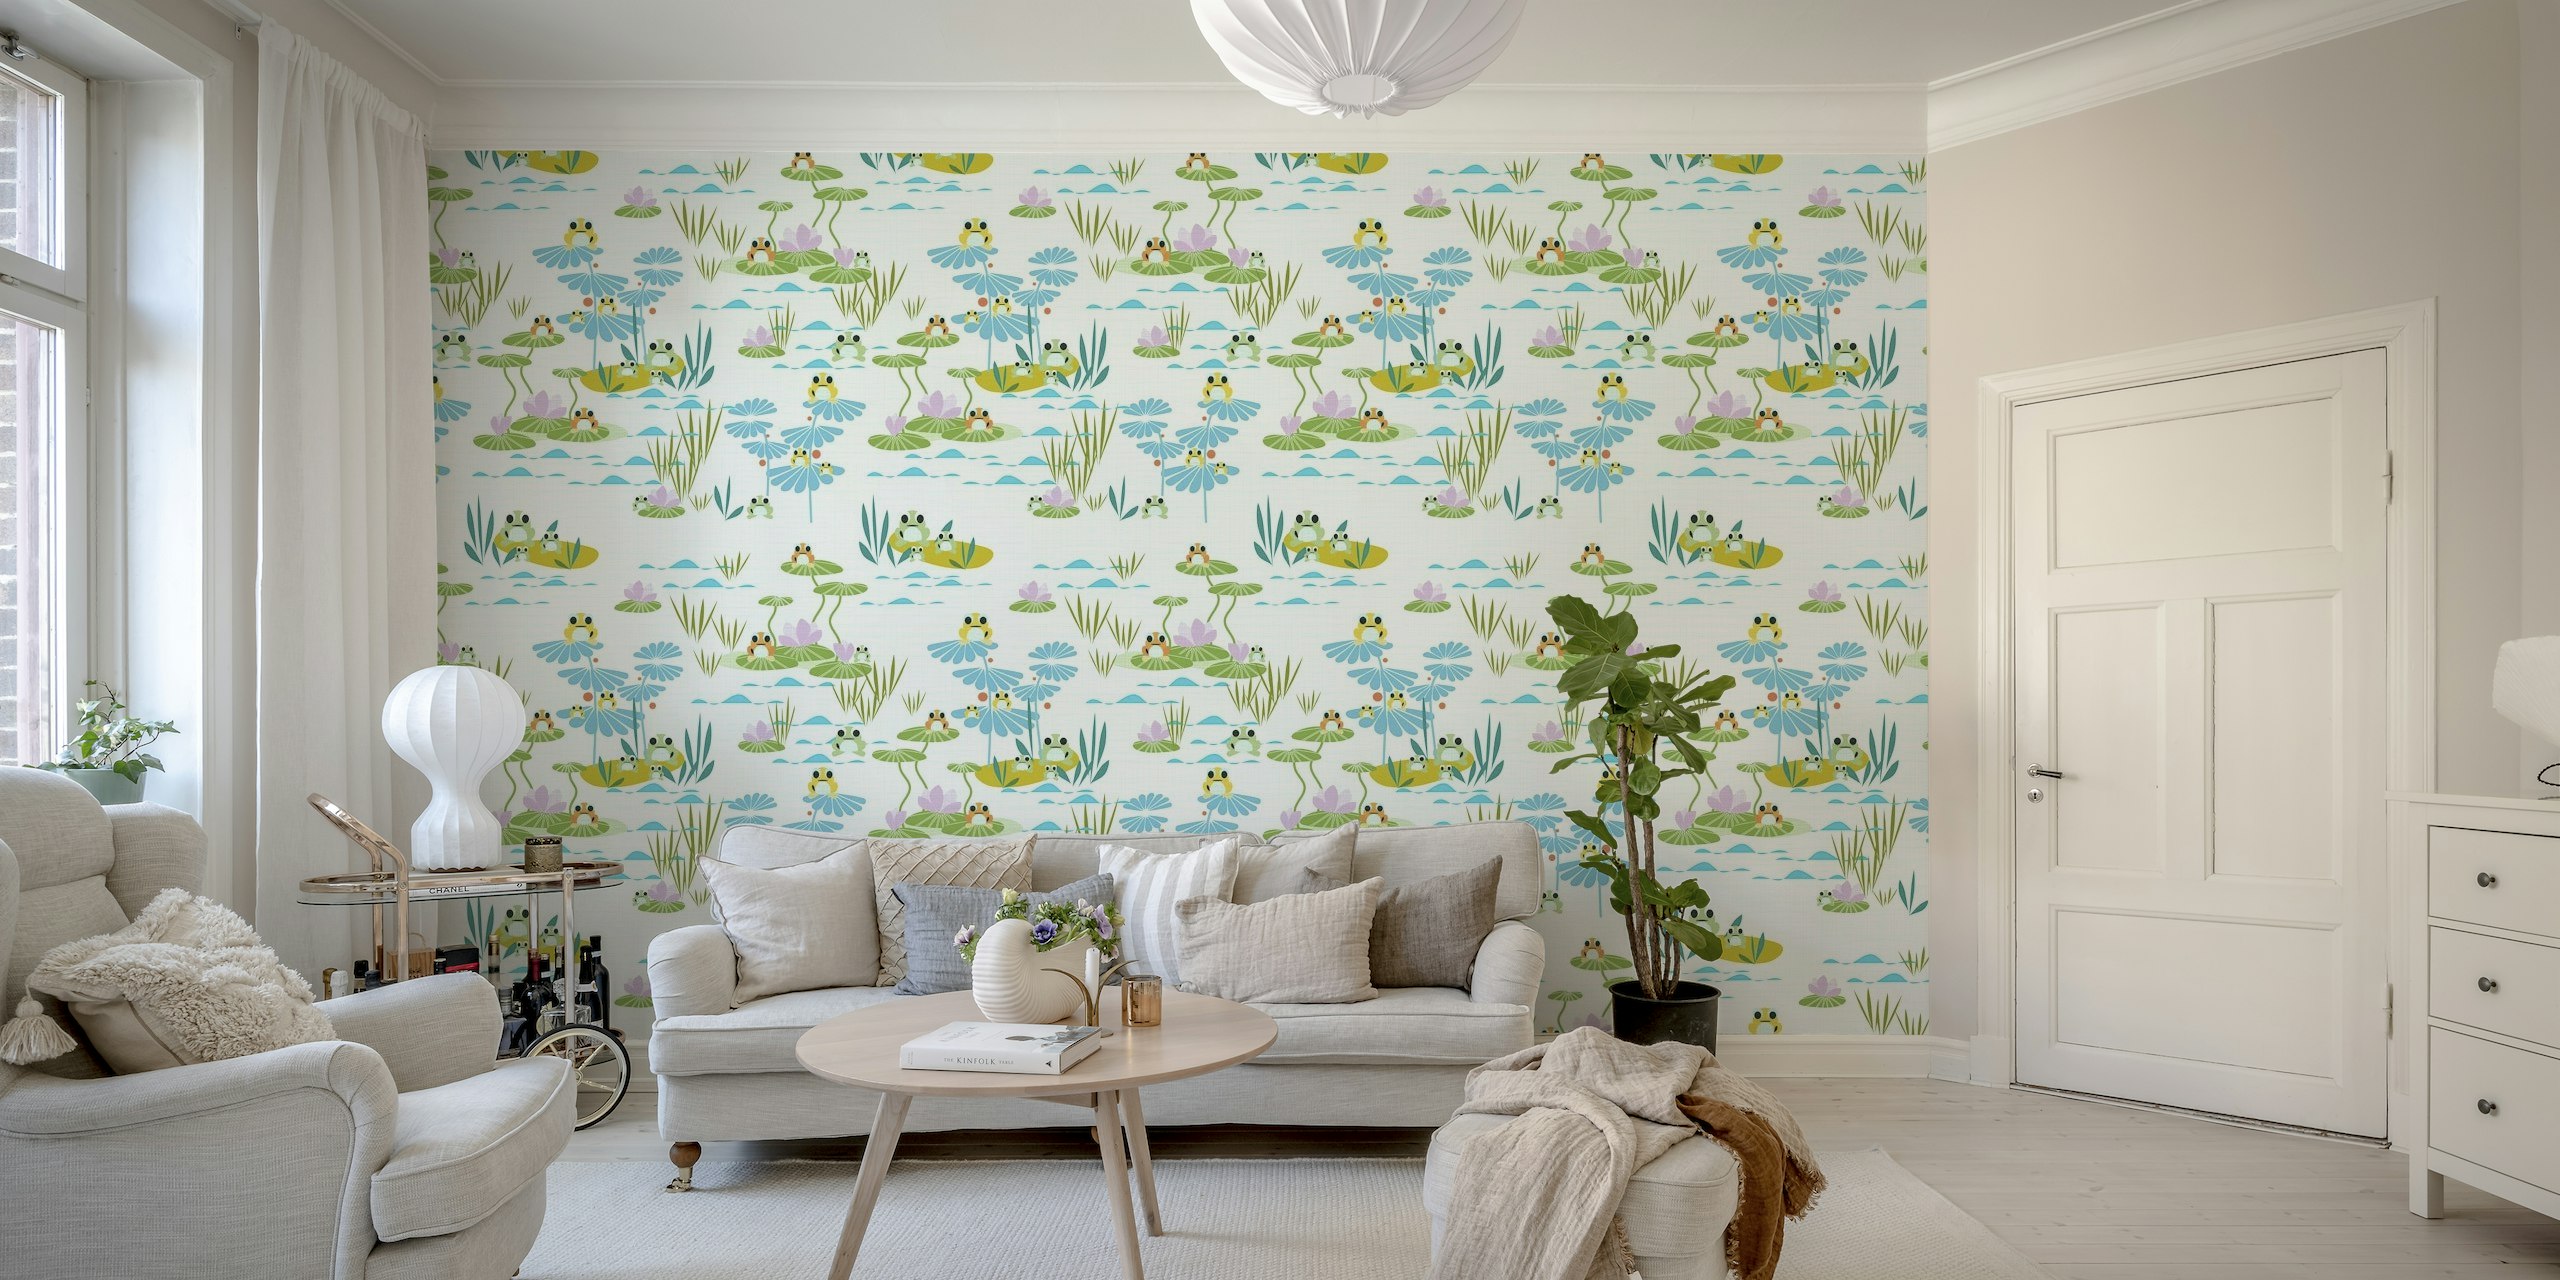 Illustrated wall mural of playful frogs on lily pads in a pond with blue water and floral elements.